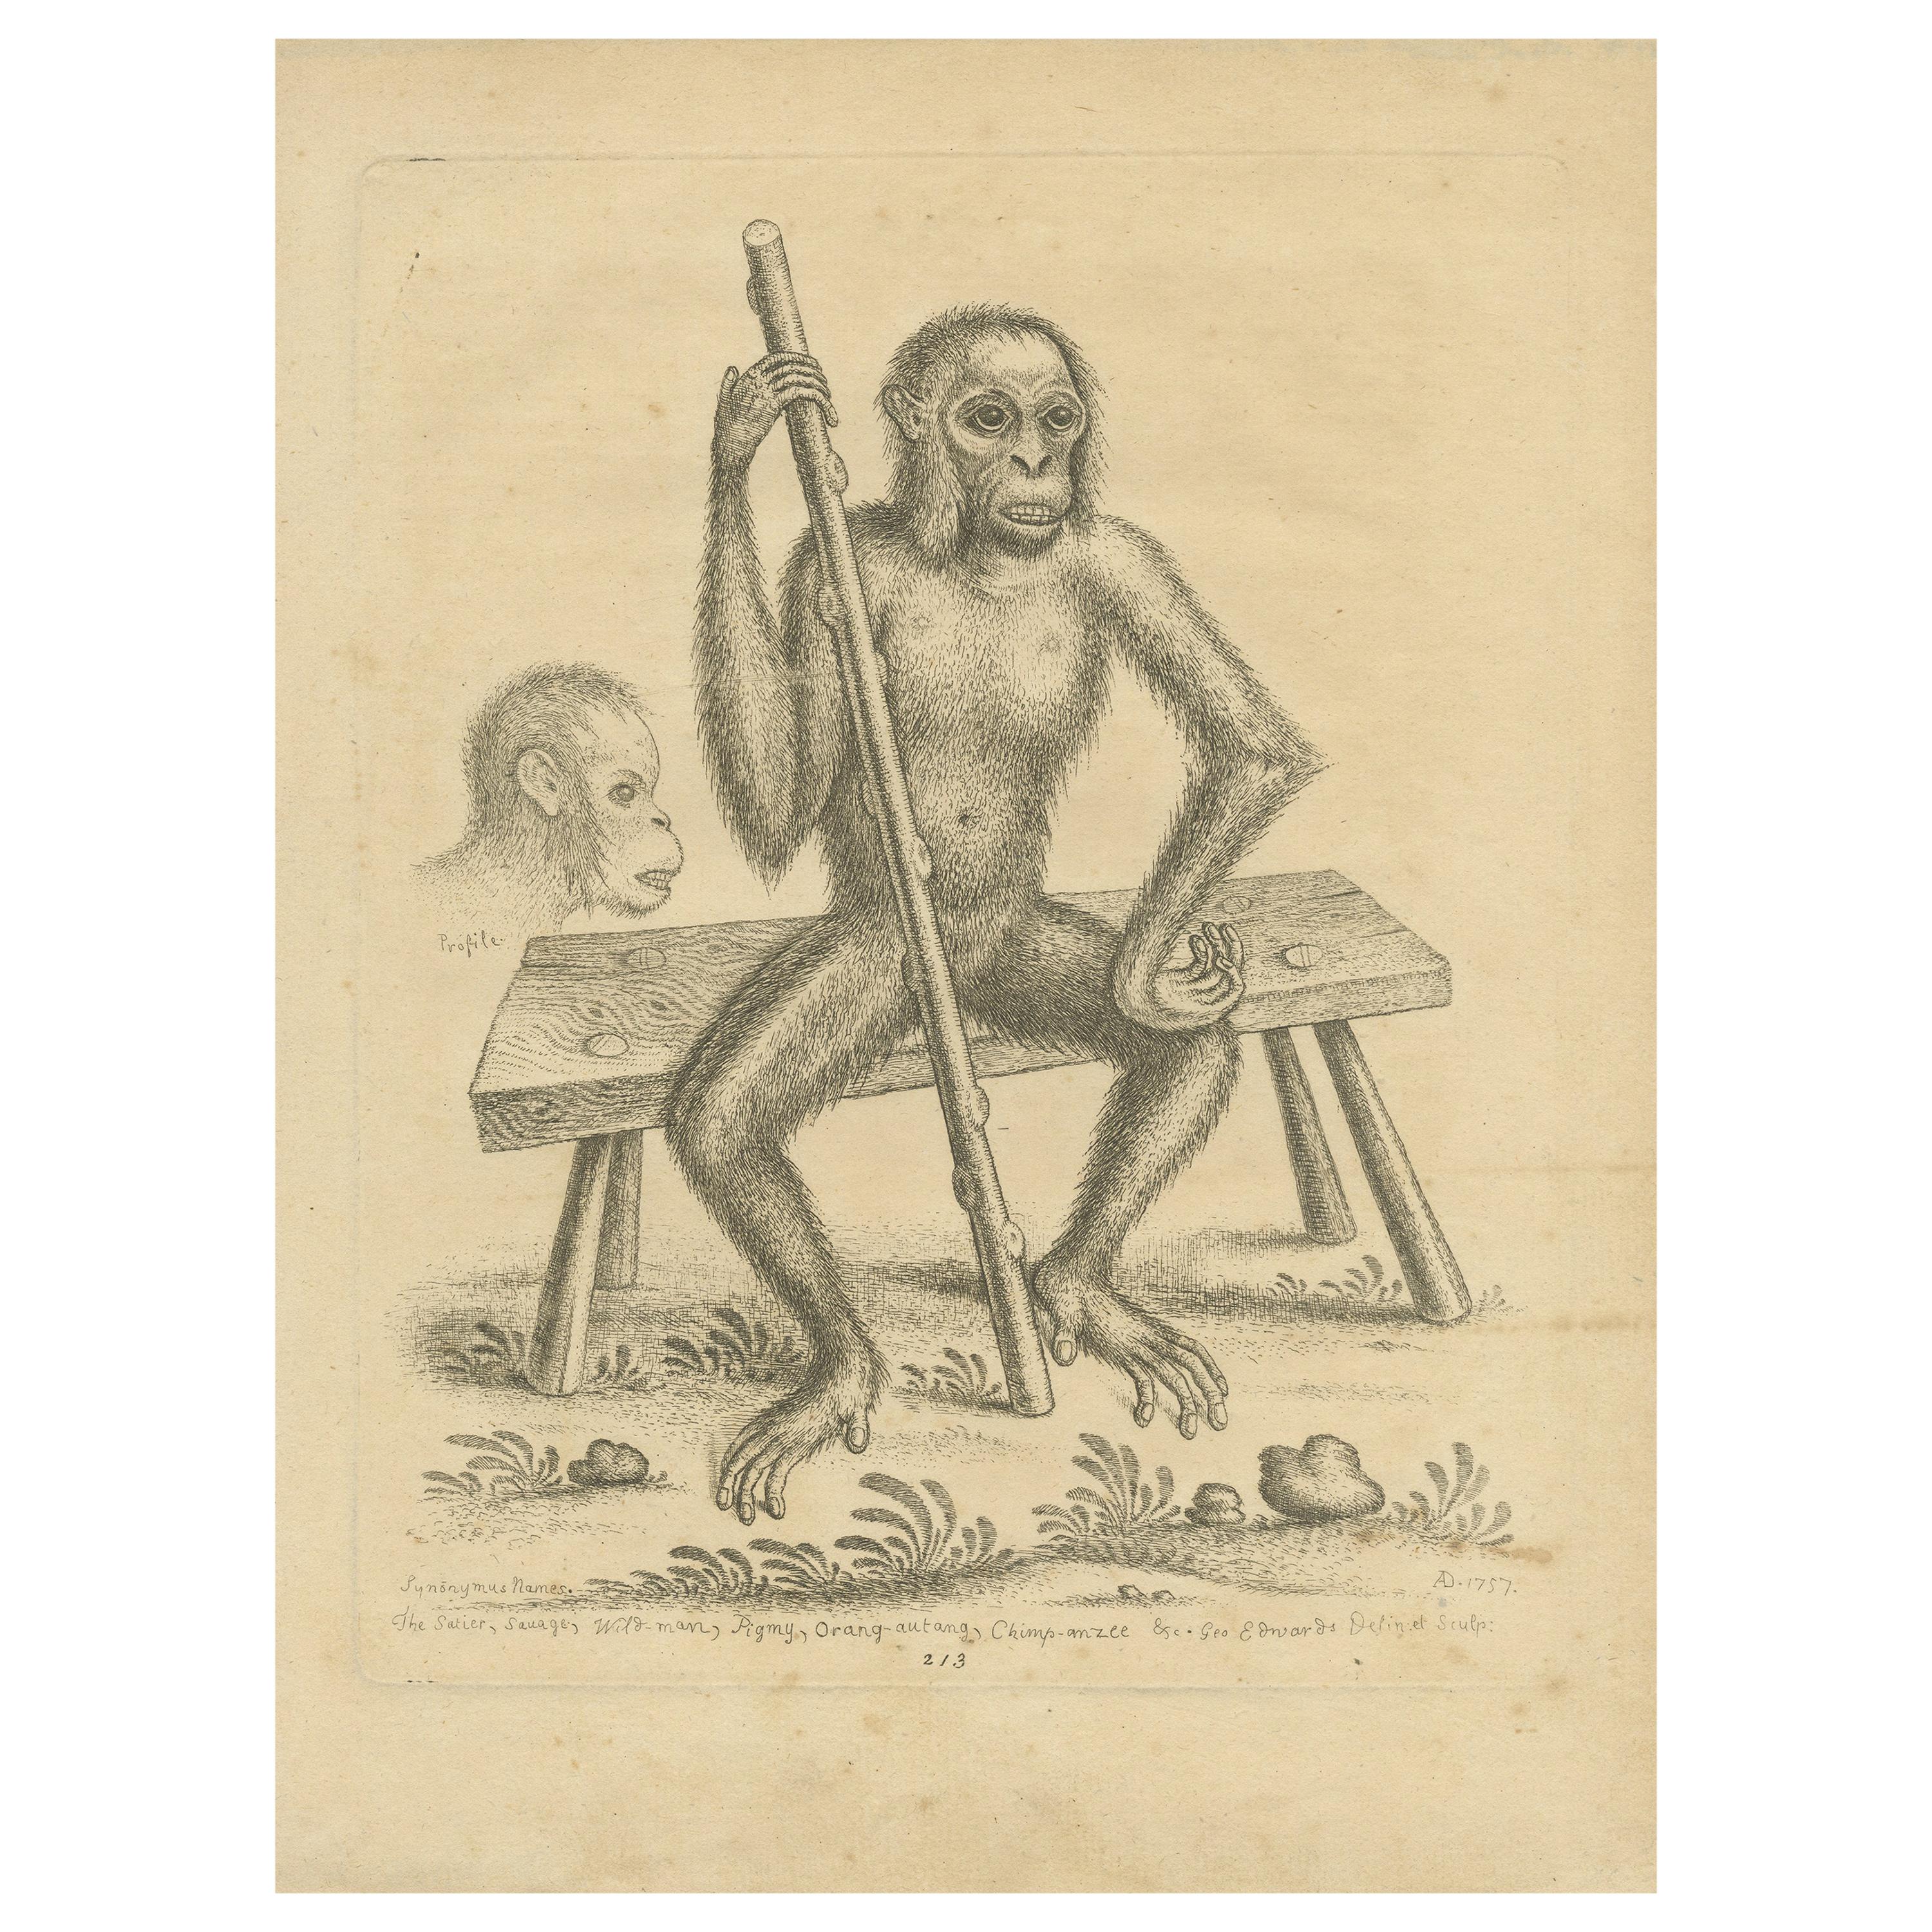 Antique Print of an Orangutan Seated on a Bench by Edwards, 1757 For Sale